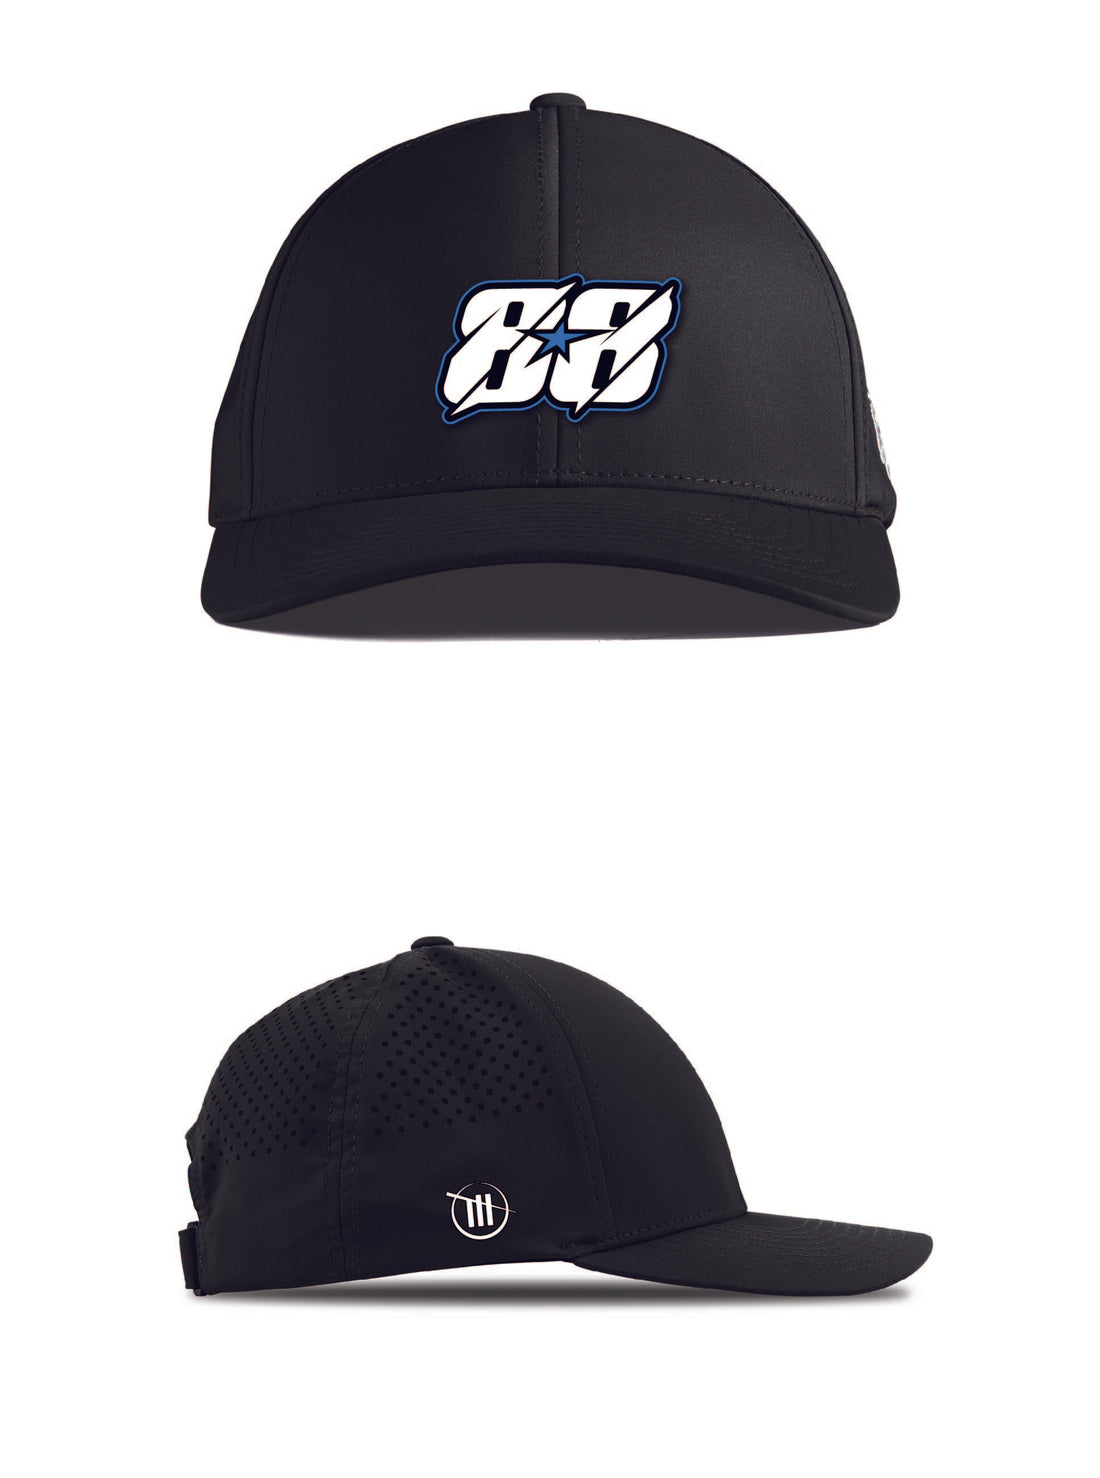 88 Performance Hat - Black and White